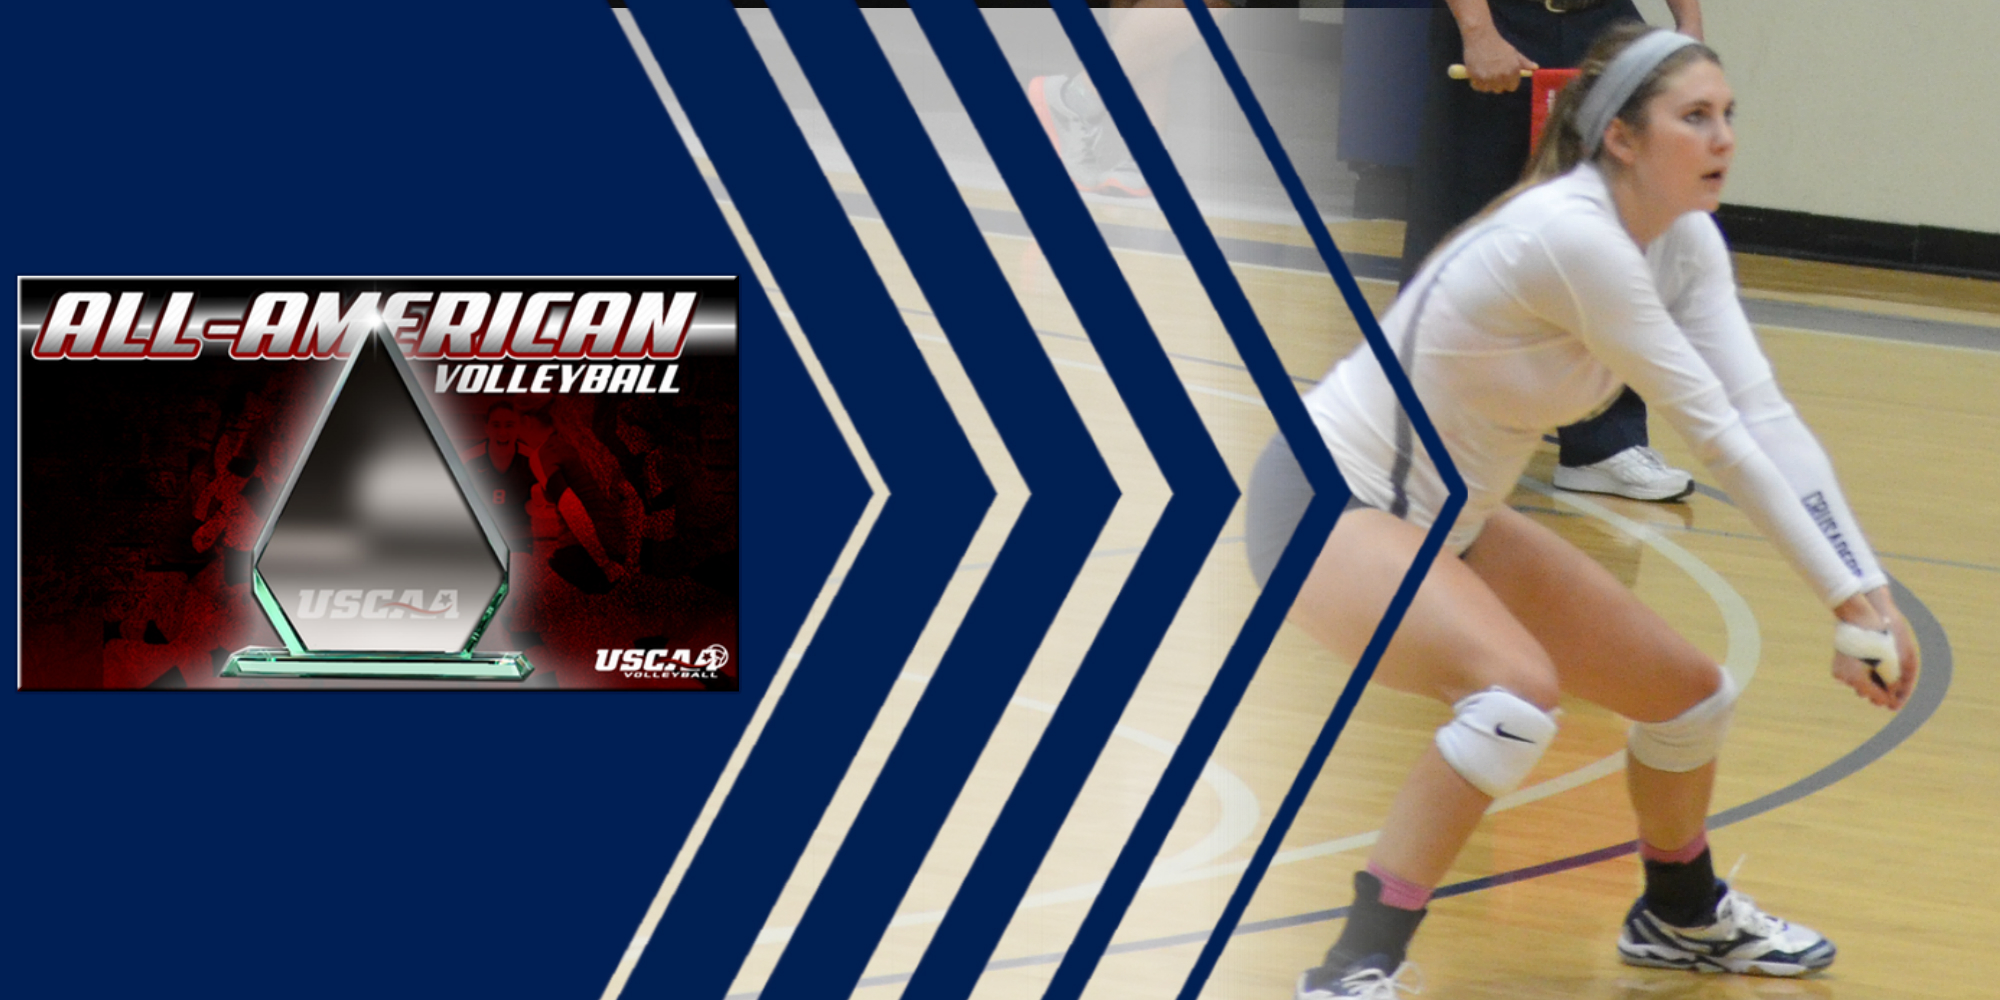 Koster Captures USCAA All-American 2nd Consecutive Year